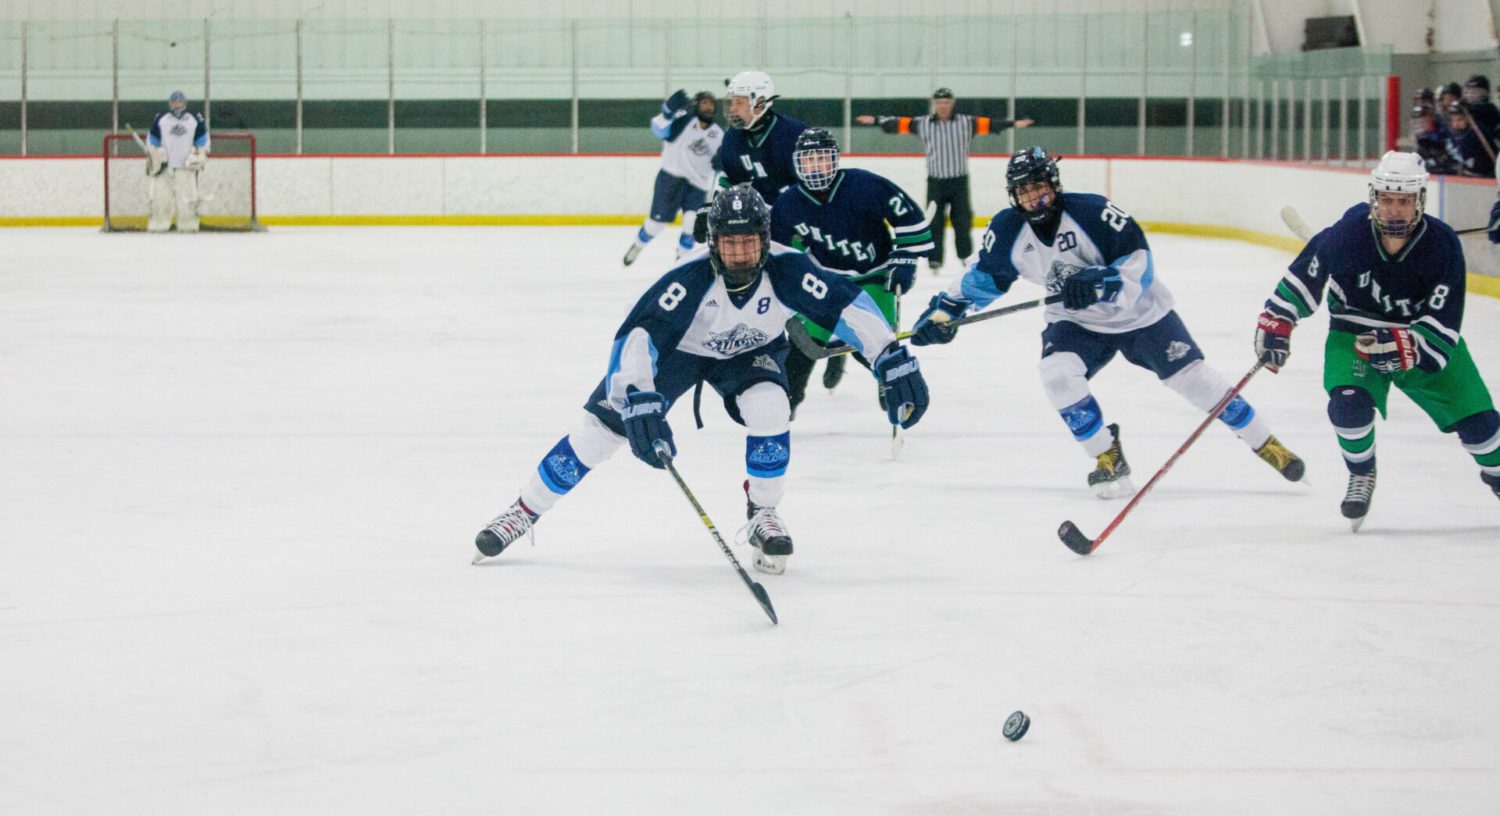 Mona Shores hockey team welcomes new coach with an 8-0 win in season opener